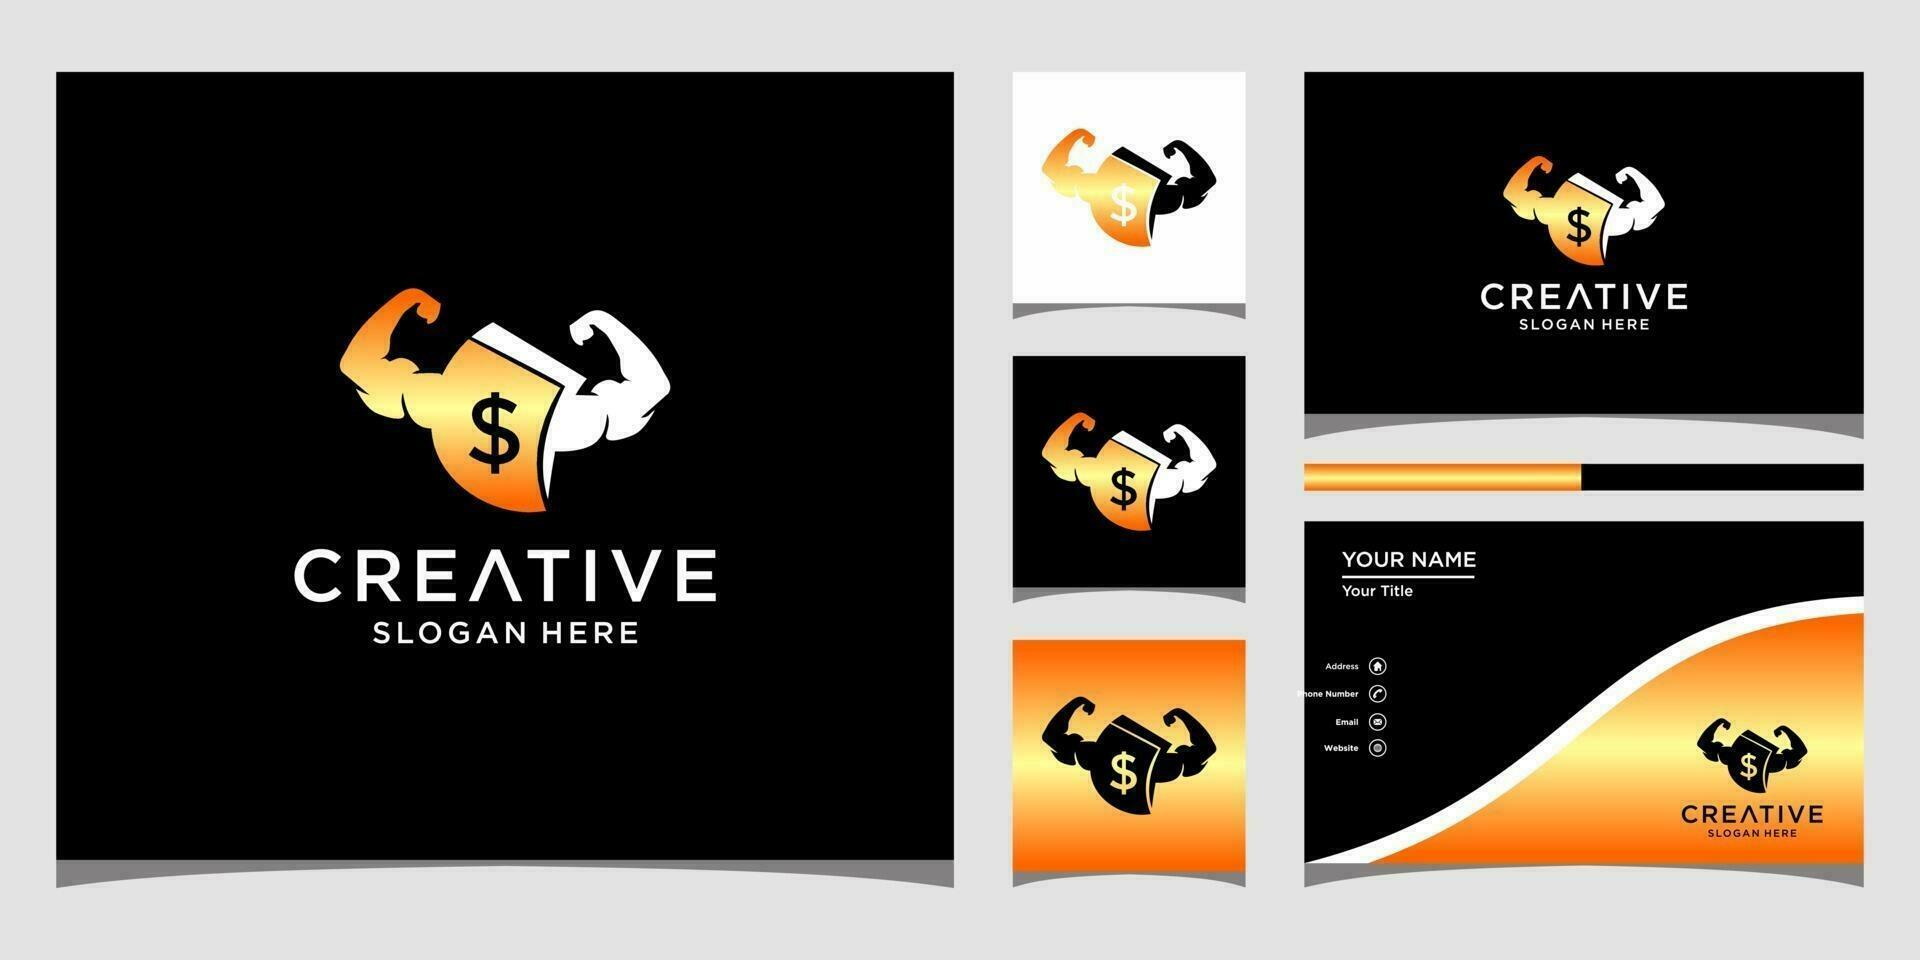 Fitness logo templates and business card design vector